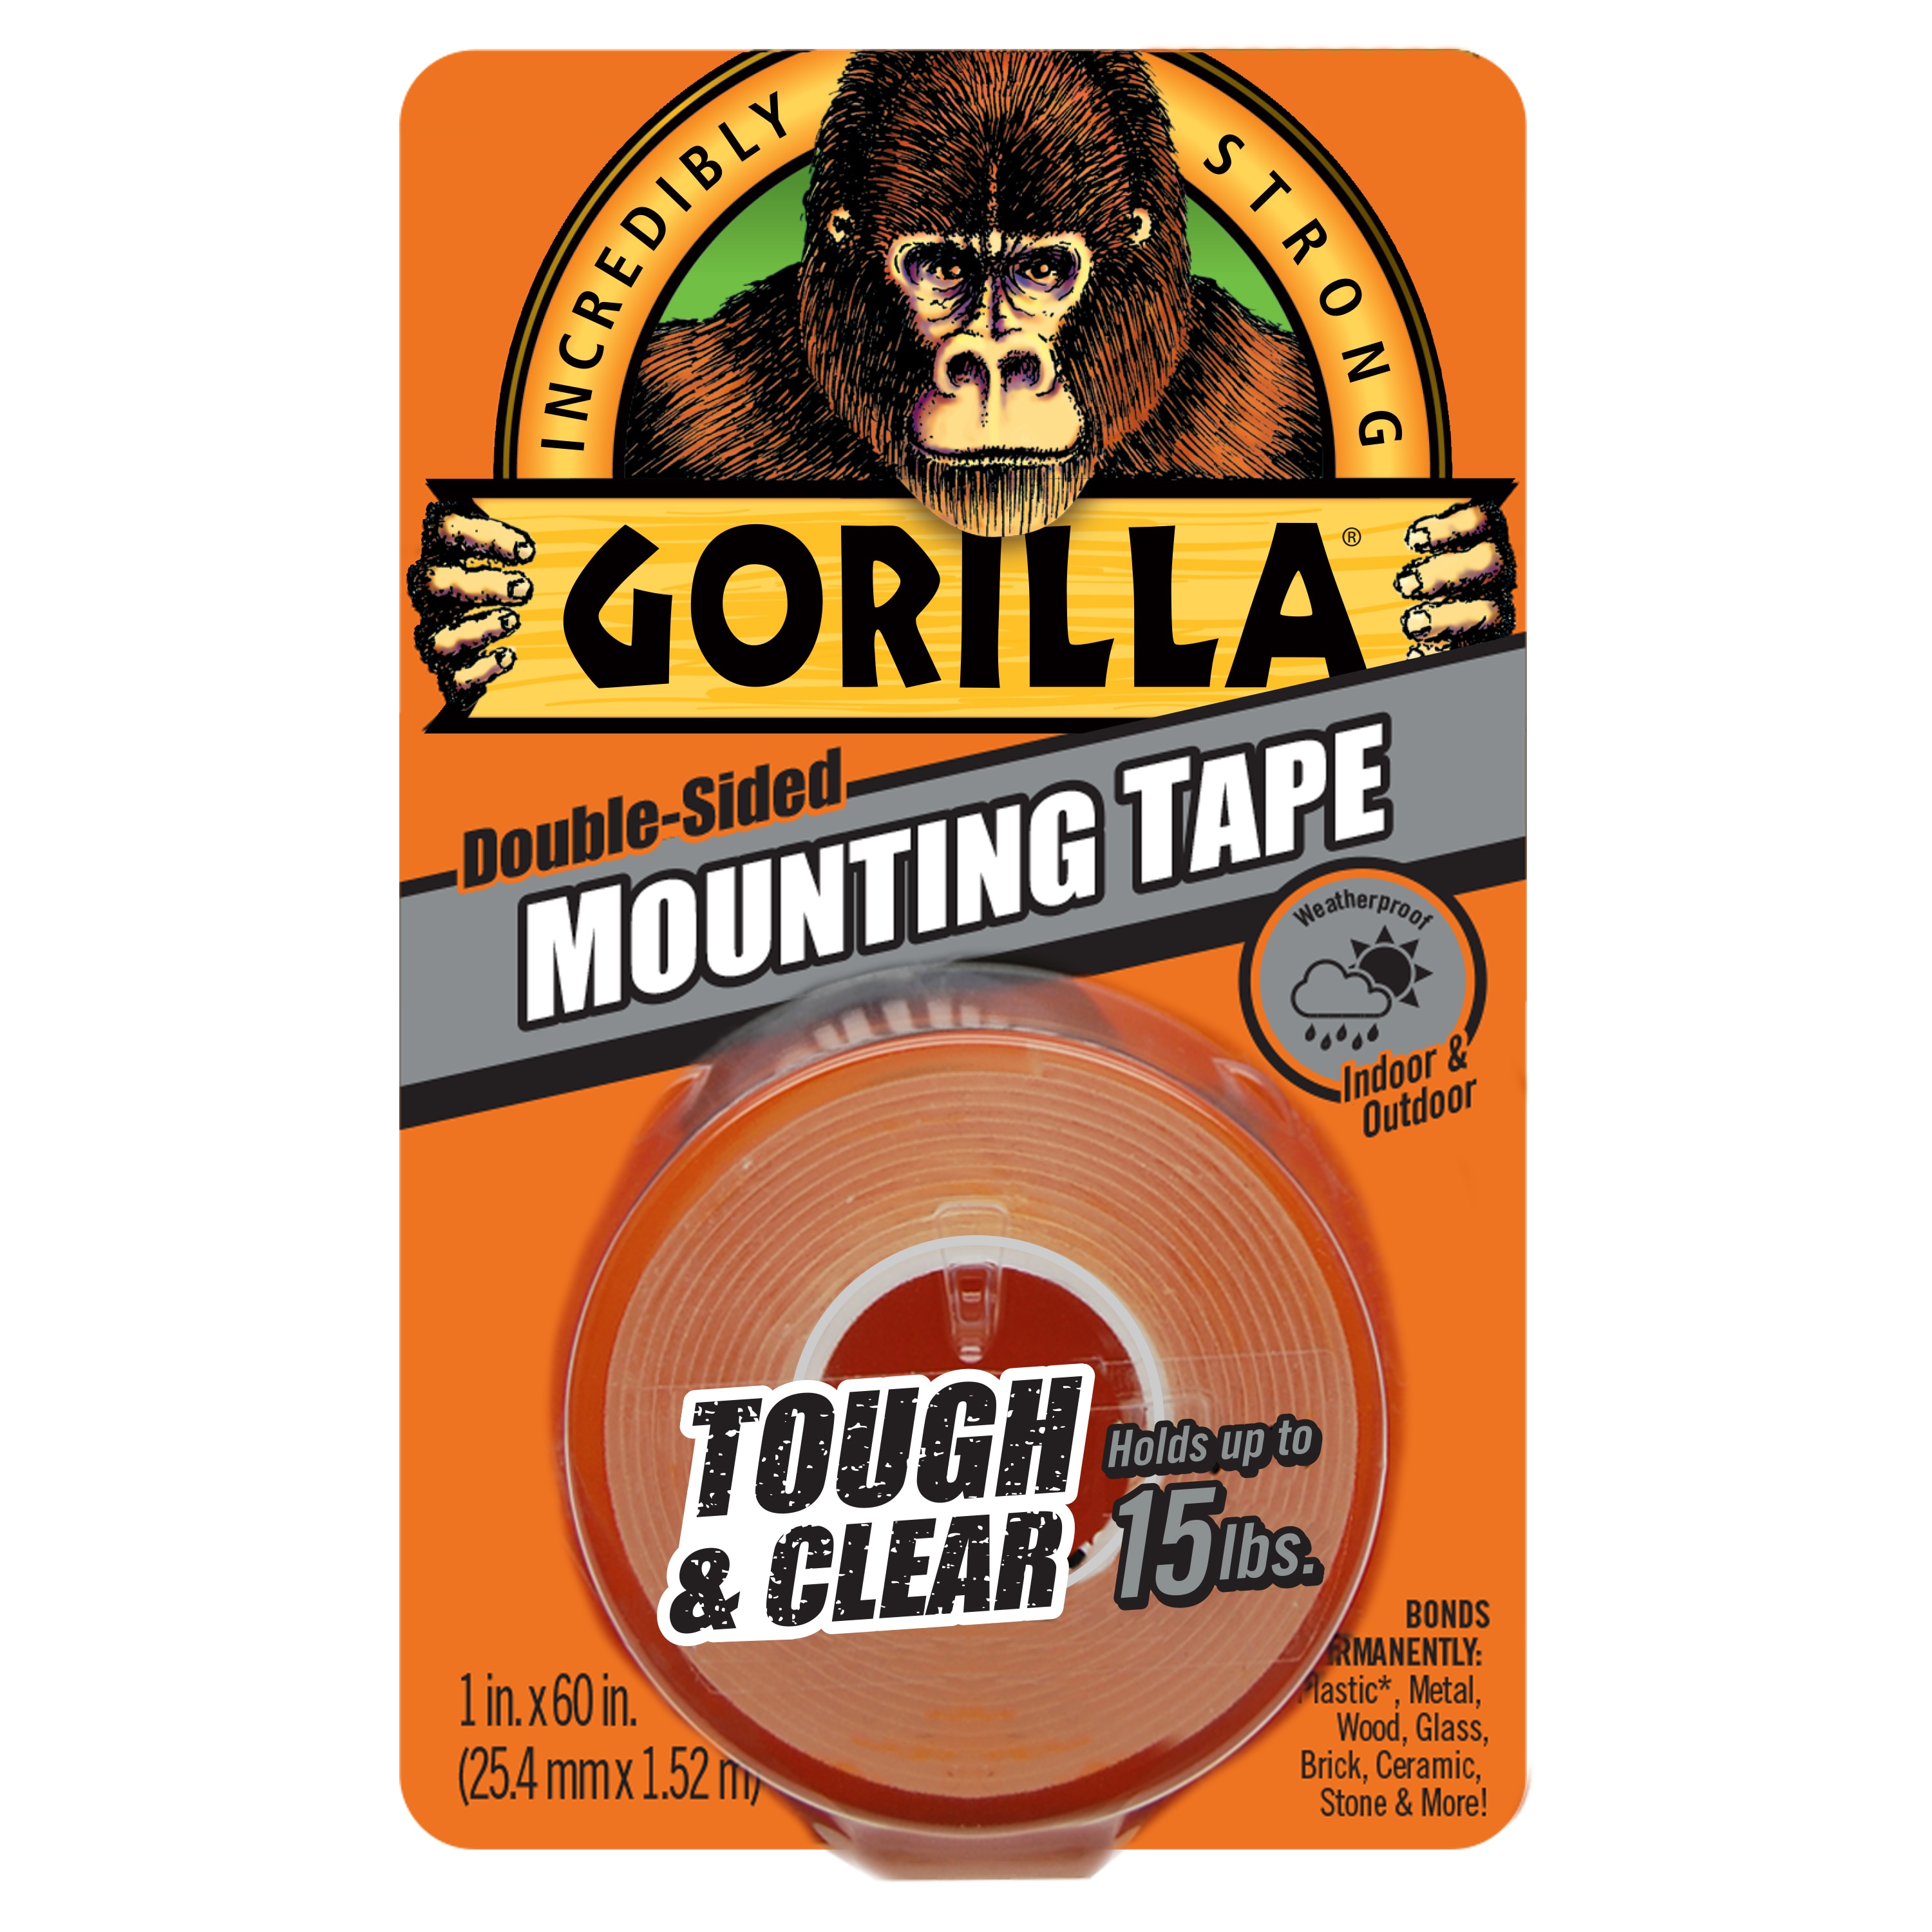 Clear, 1 x 150 Gorilla Tough & Clear Double Sided XL Mounting Tape 2 Pack of 1 